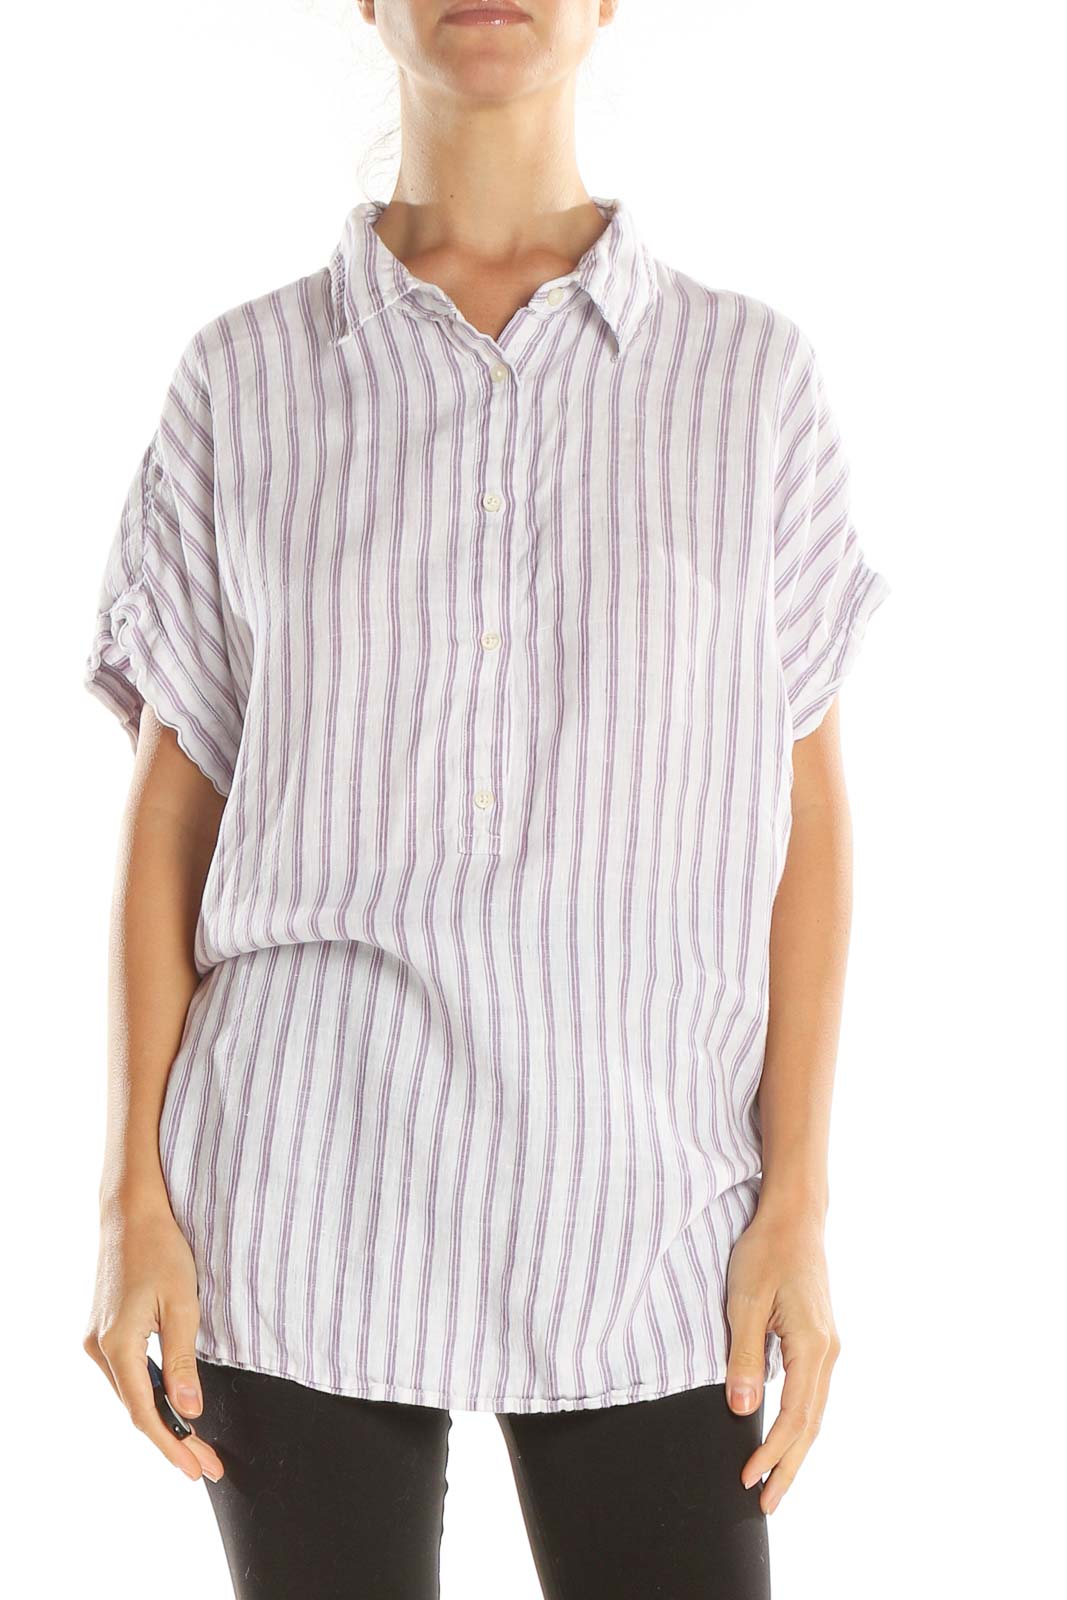 White Purple Striped Casual Top Front